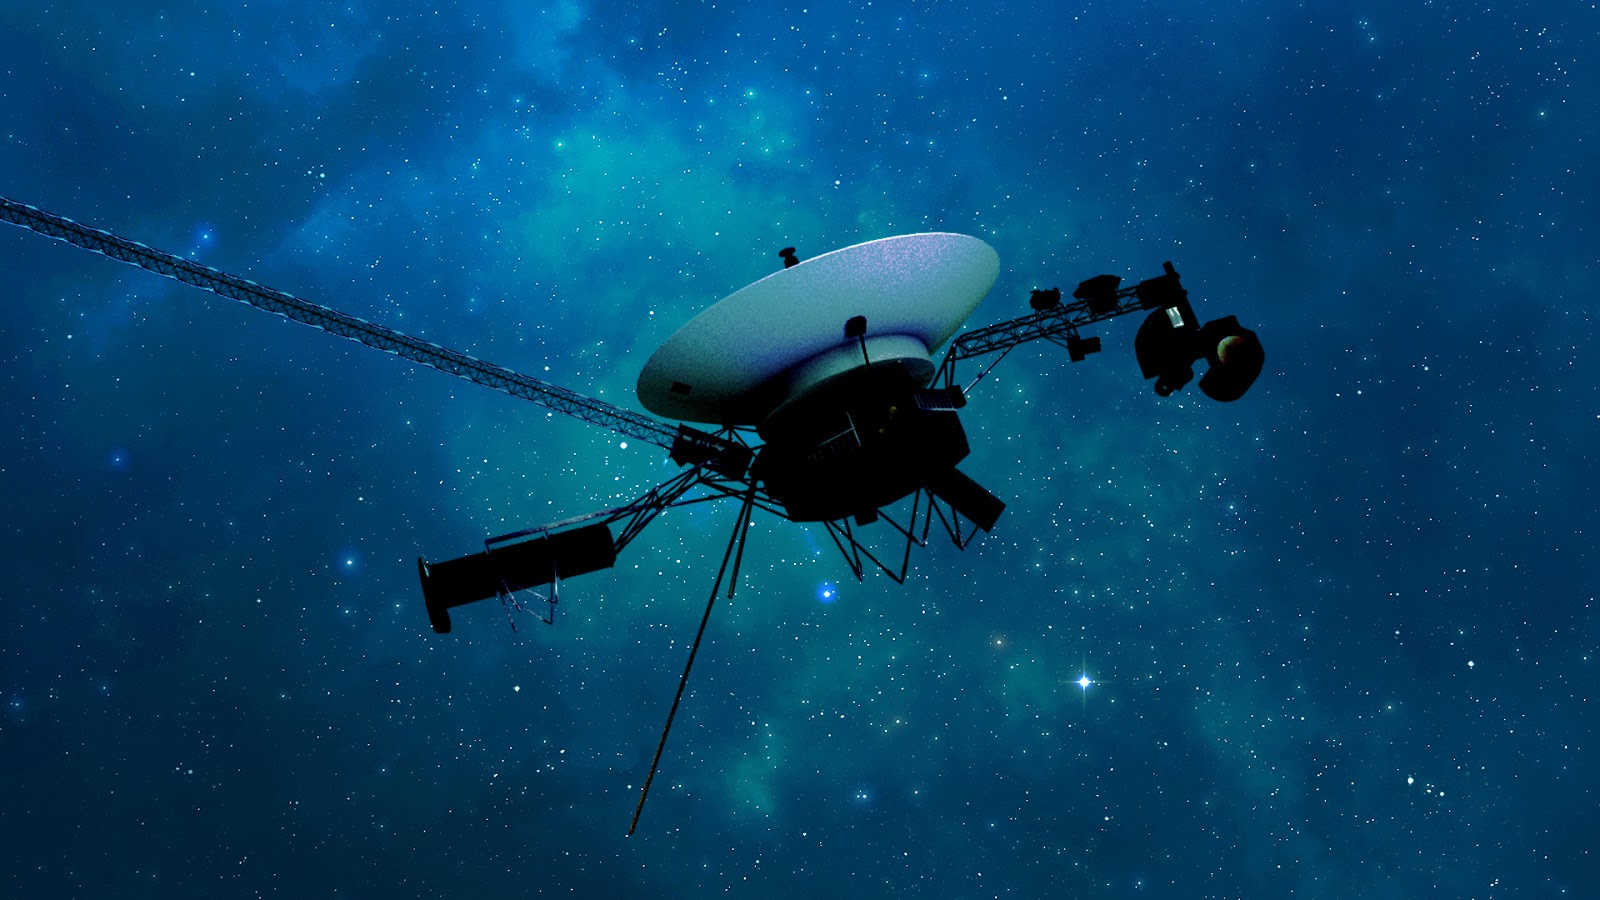 Illustration of voyager spacecraft traveling through space with a starry sky and nebula in the background.